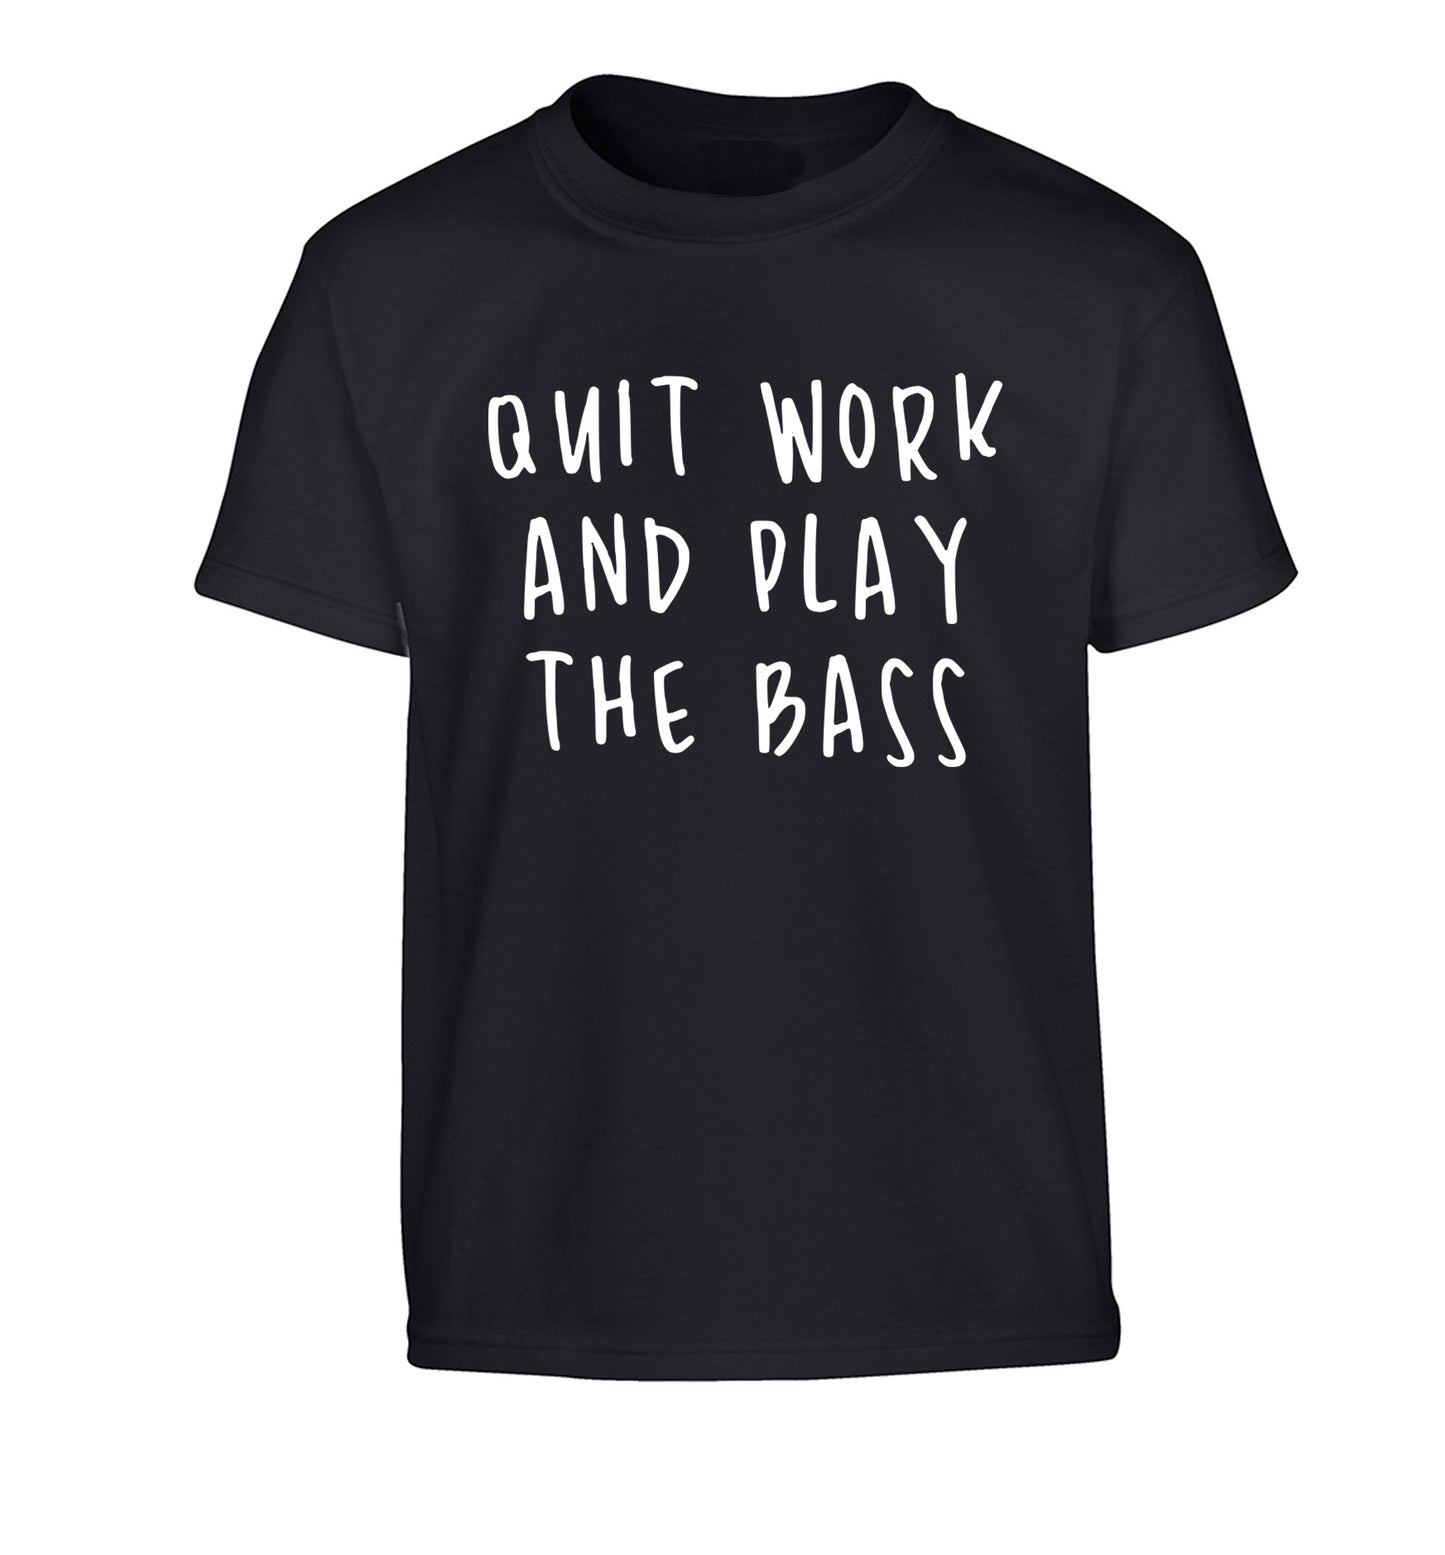 Quit work and play the bass Children's black Tshirt 12-14 Years